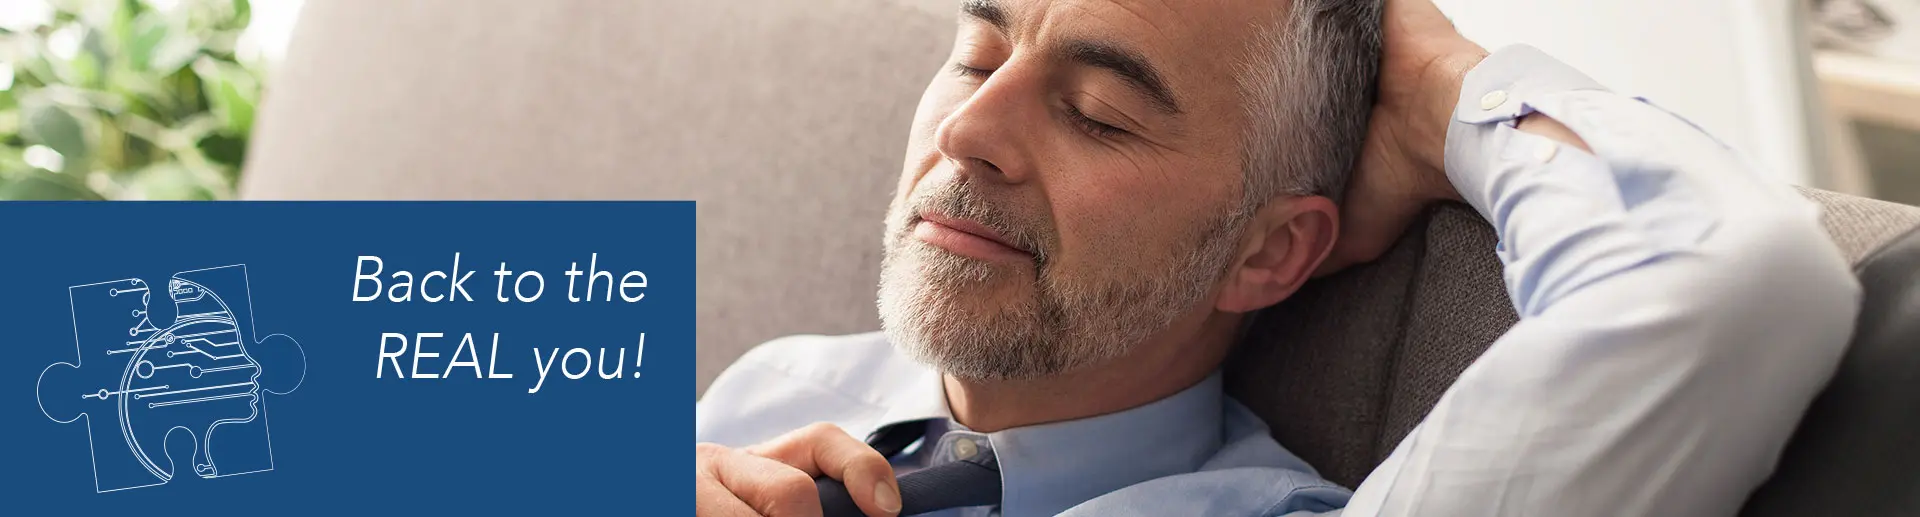 MATURE MAN RELAXING WITH EYES CLOSED